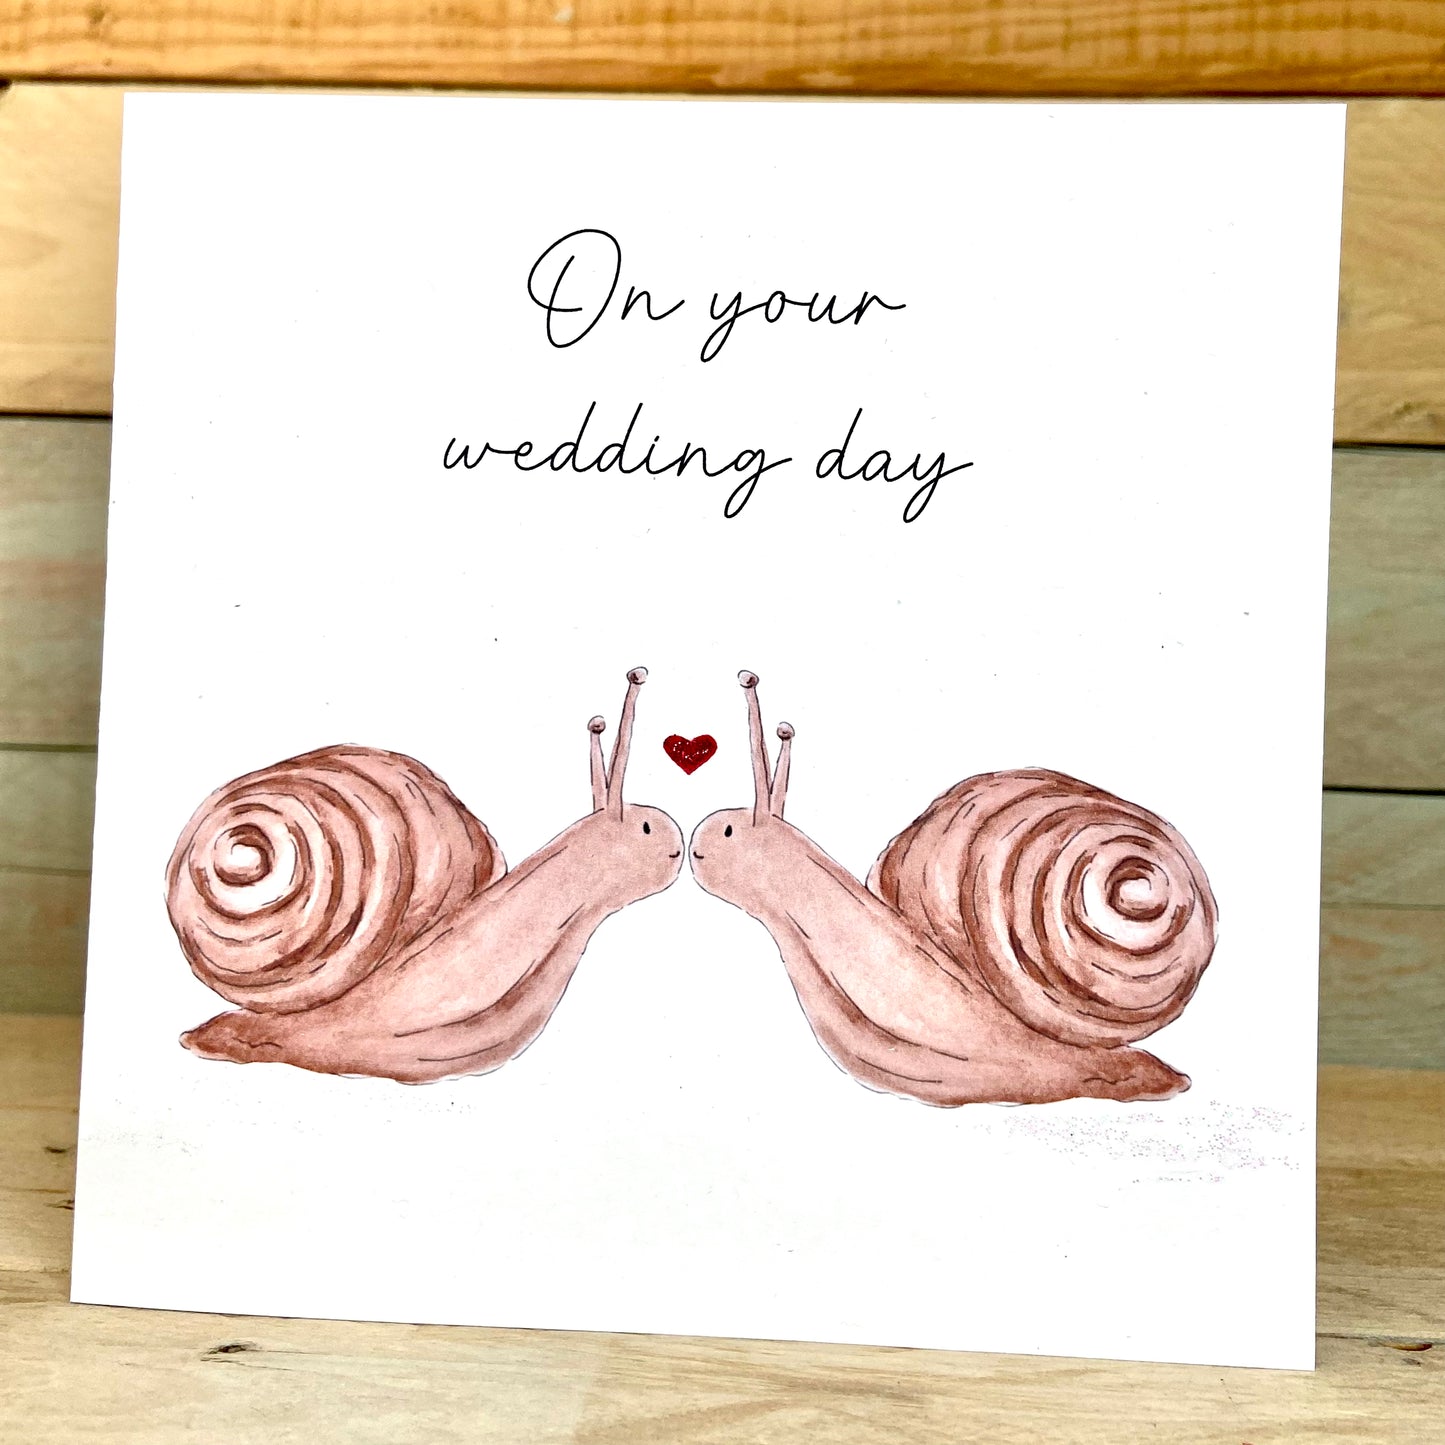 Shellie and Stevie The Snails Wedding Card